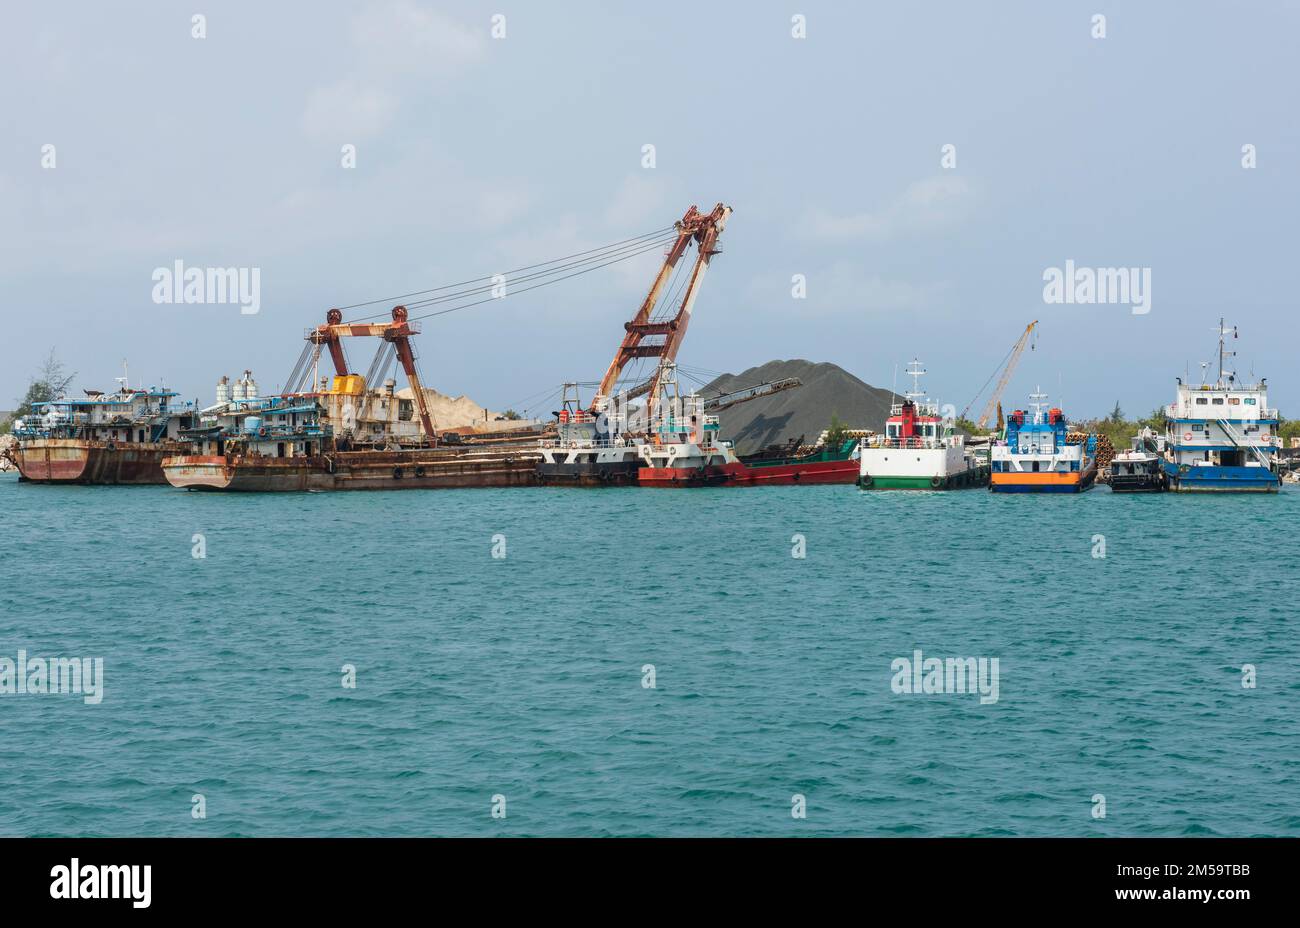 Small cargo ships moored in commercial industrial shipping port on island tropical lagoon Stock Photo